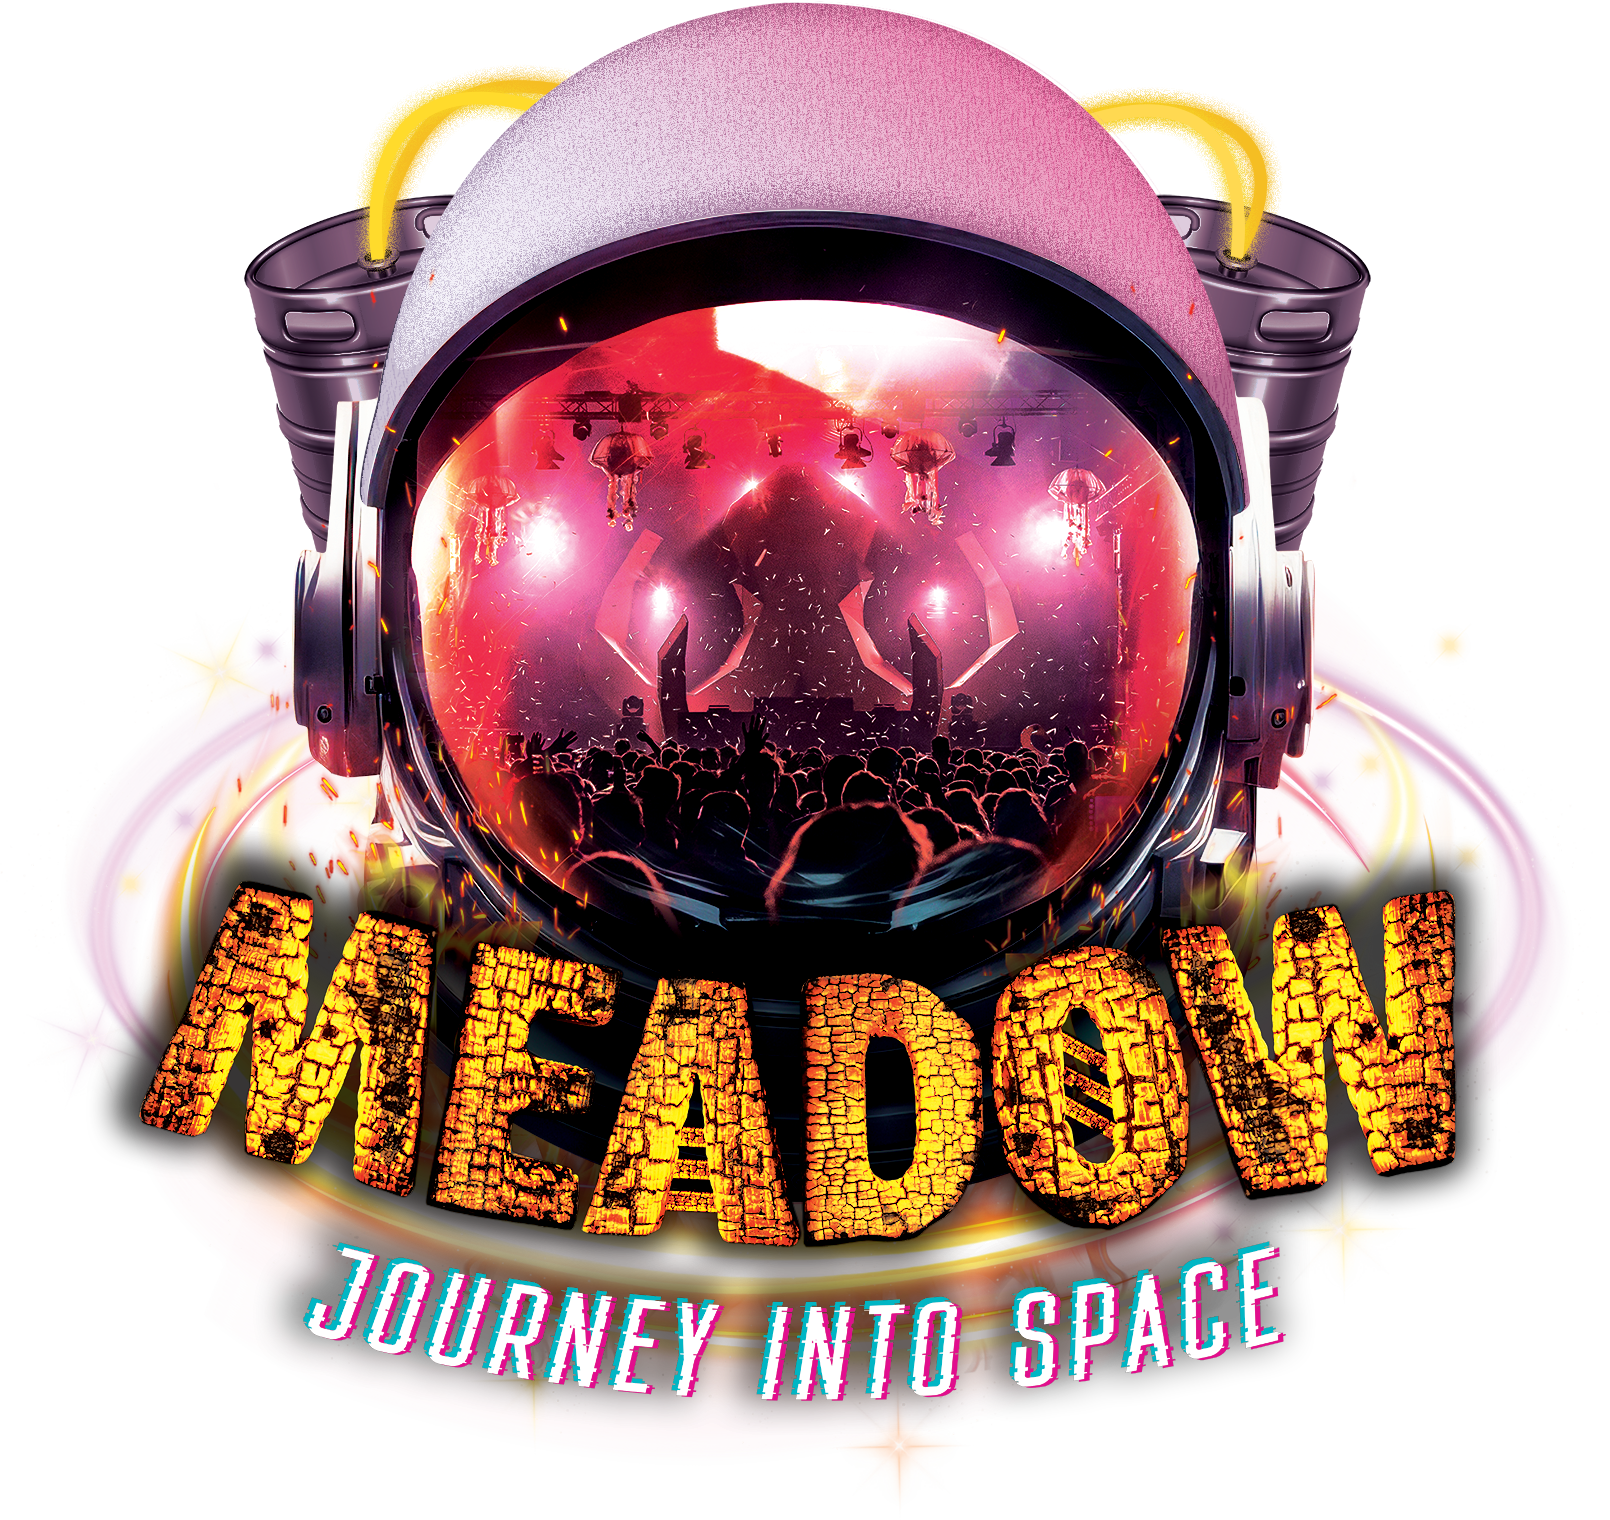 logo: Journey into space